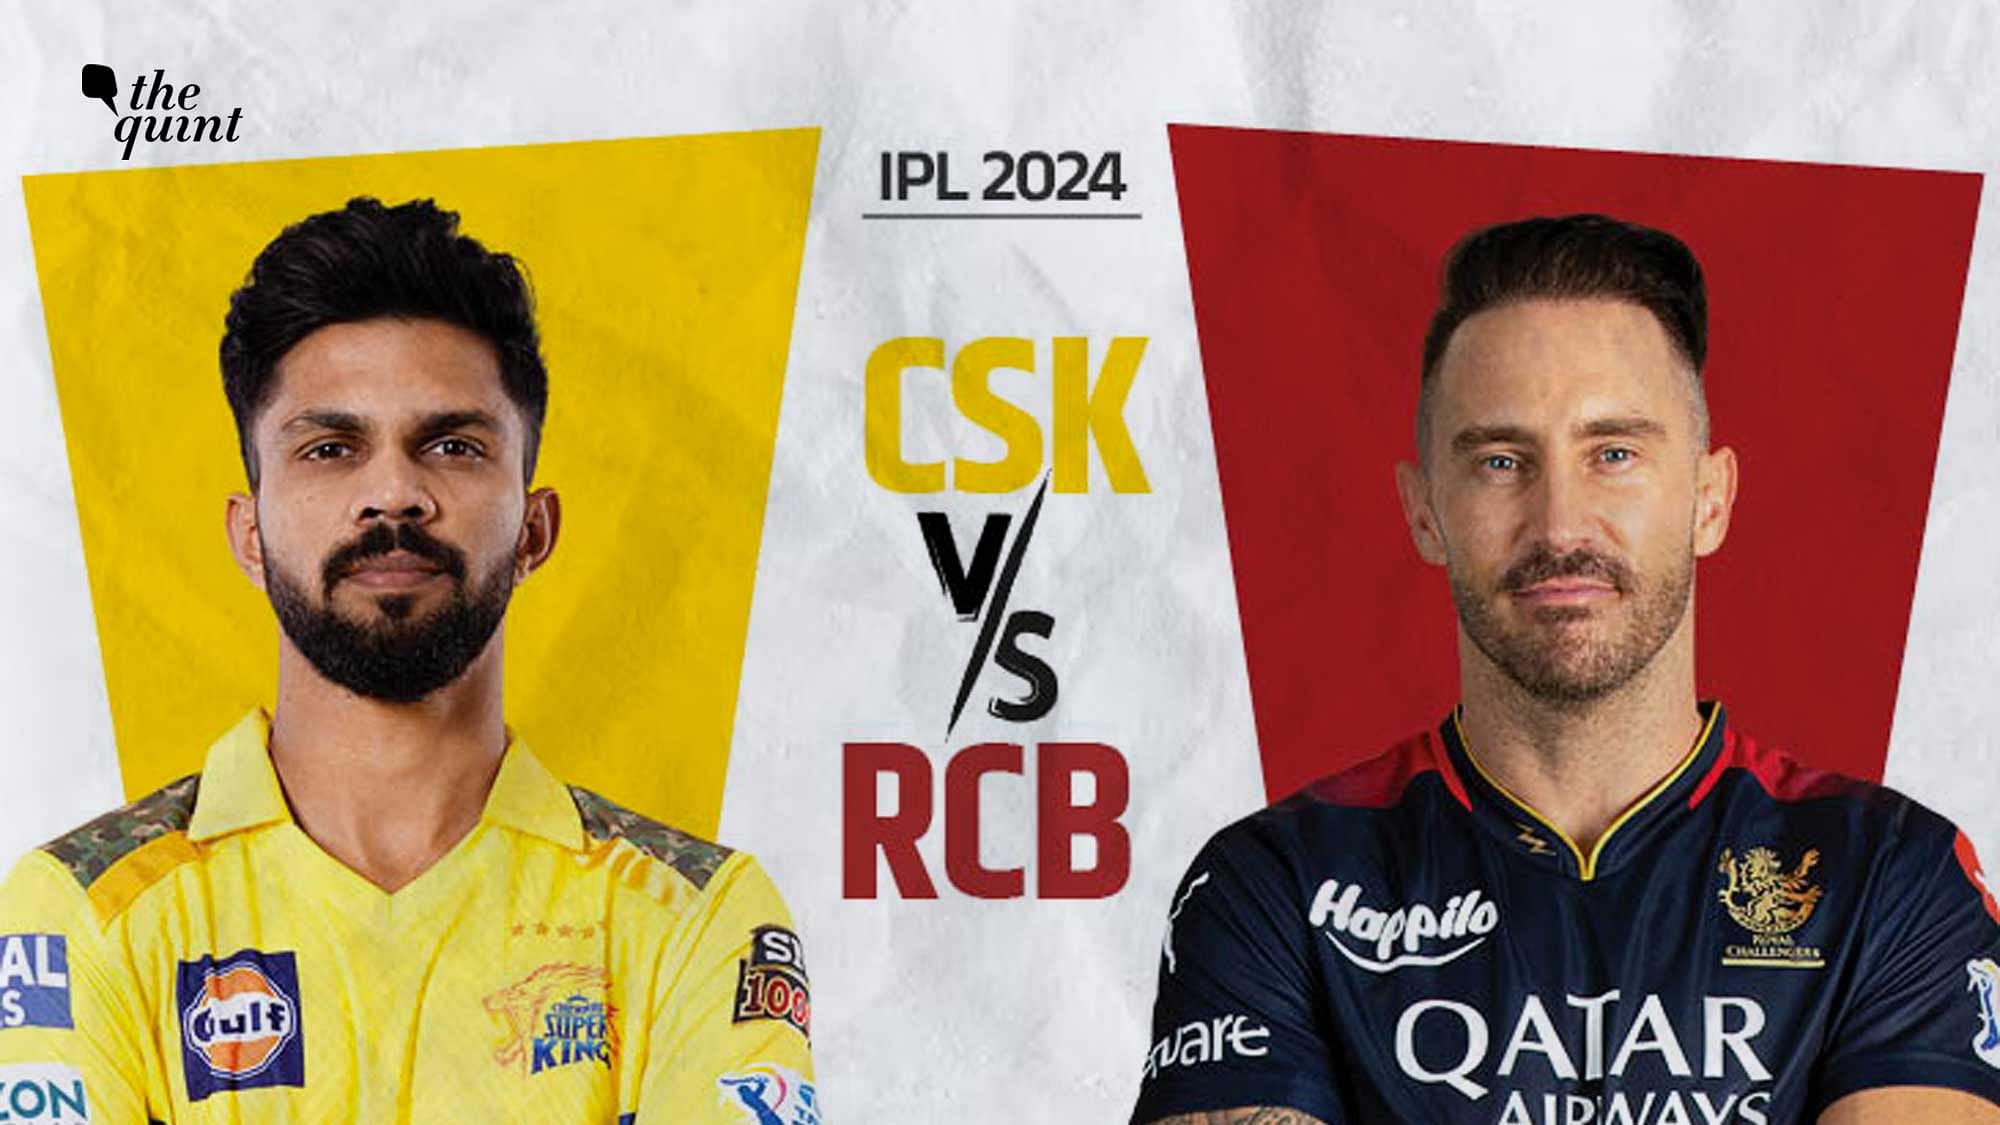 CSK vs RCB IPL 2024 Live Streaming Date, Time, Venue, Squads, Opening